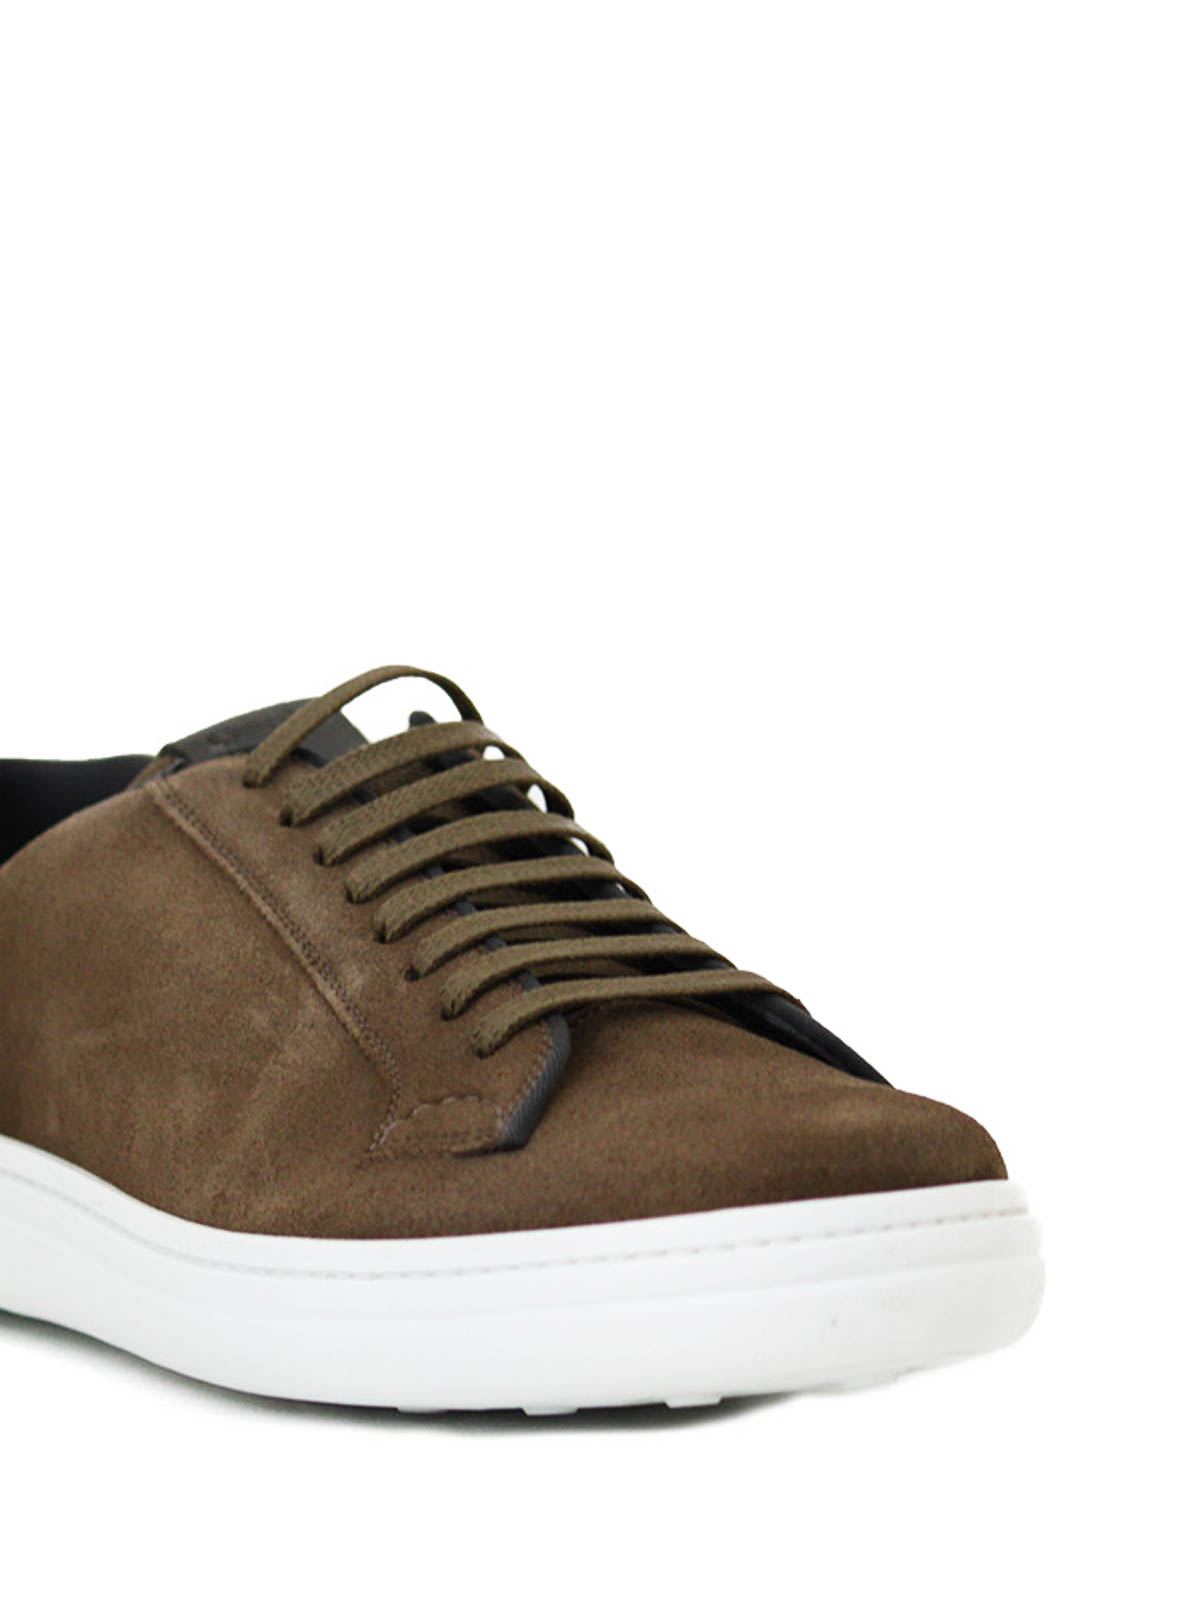 Suede sneakers by Church's - trainers | iKRIX